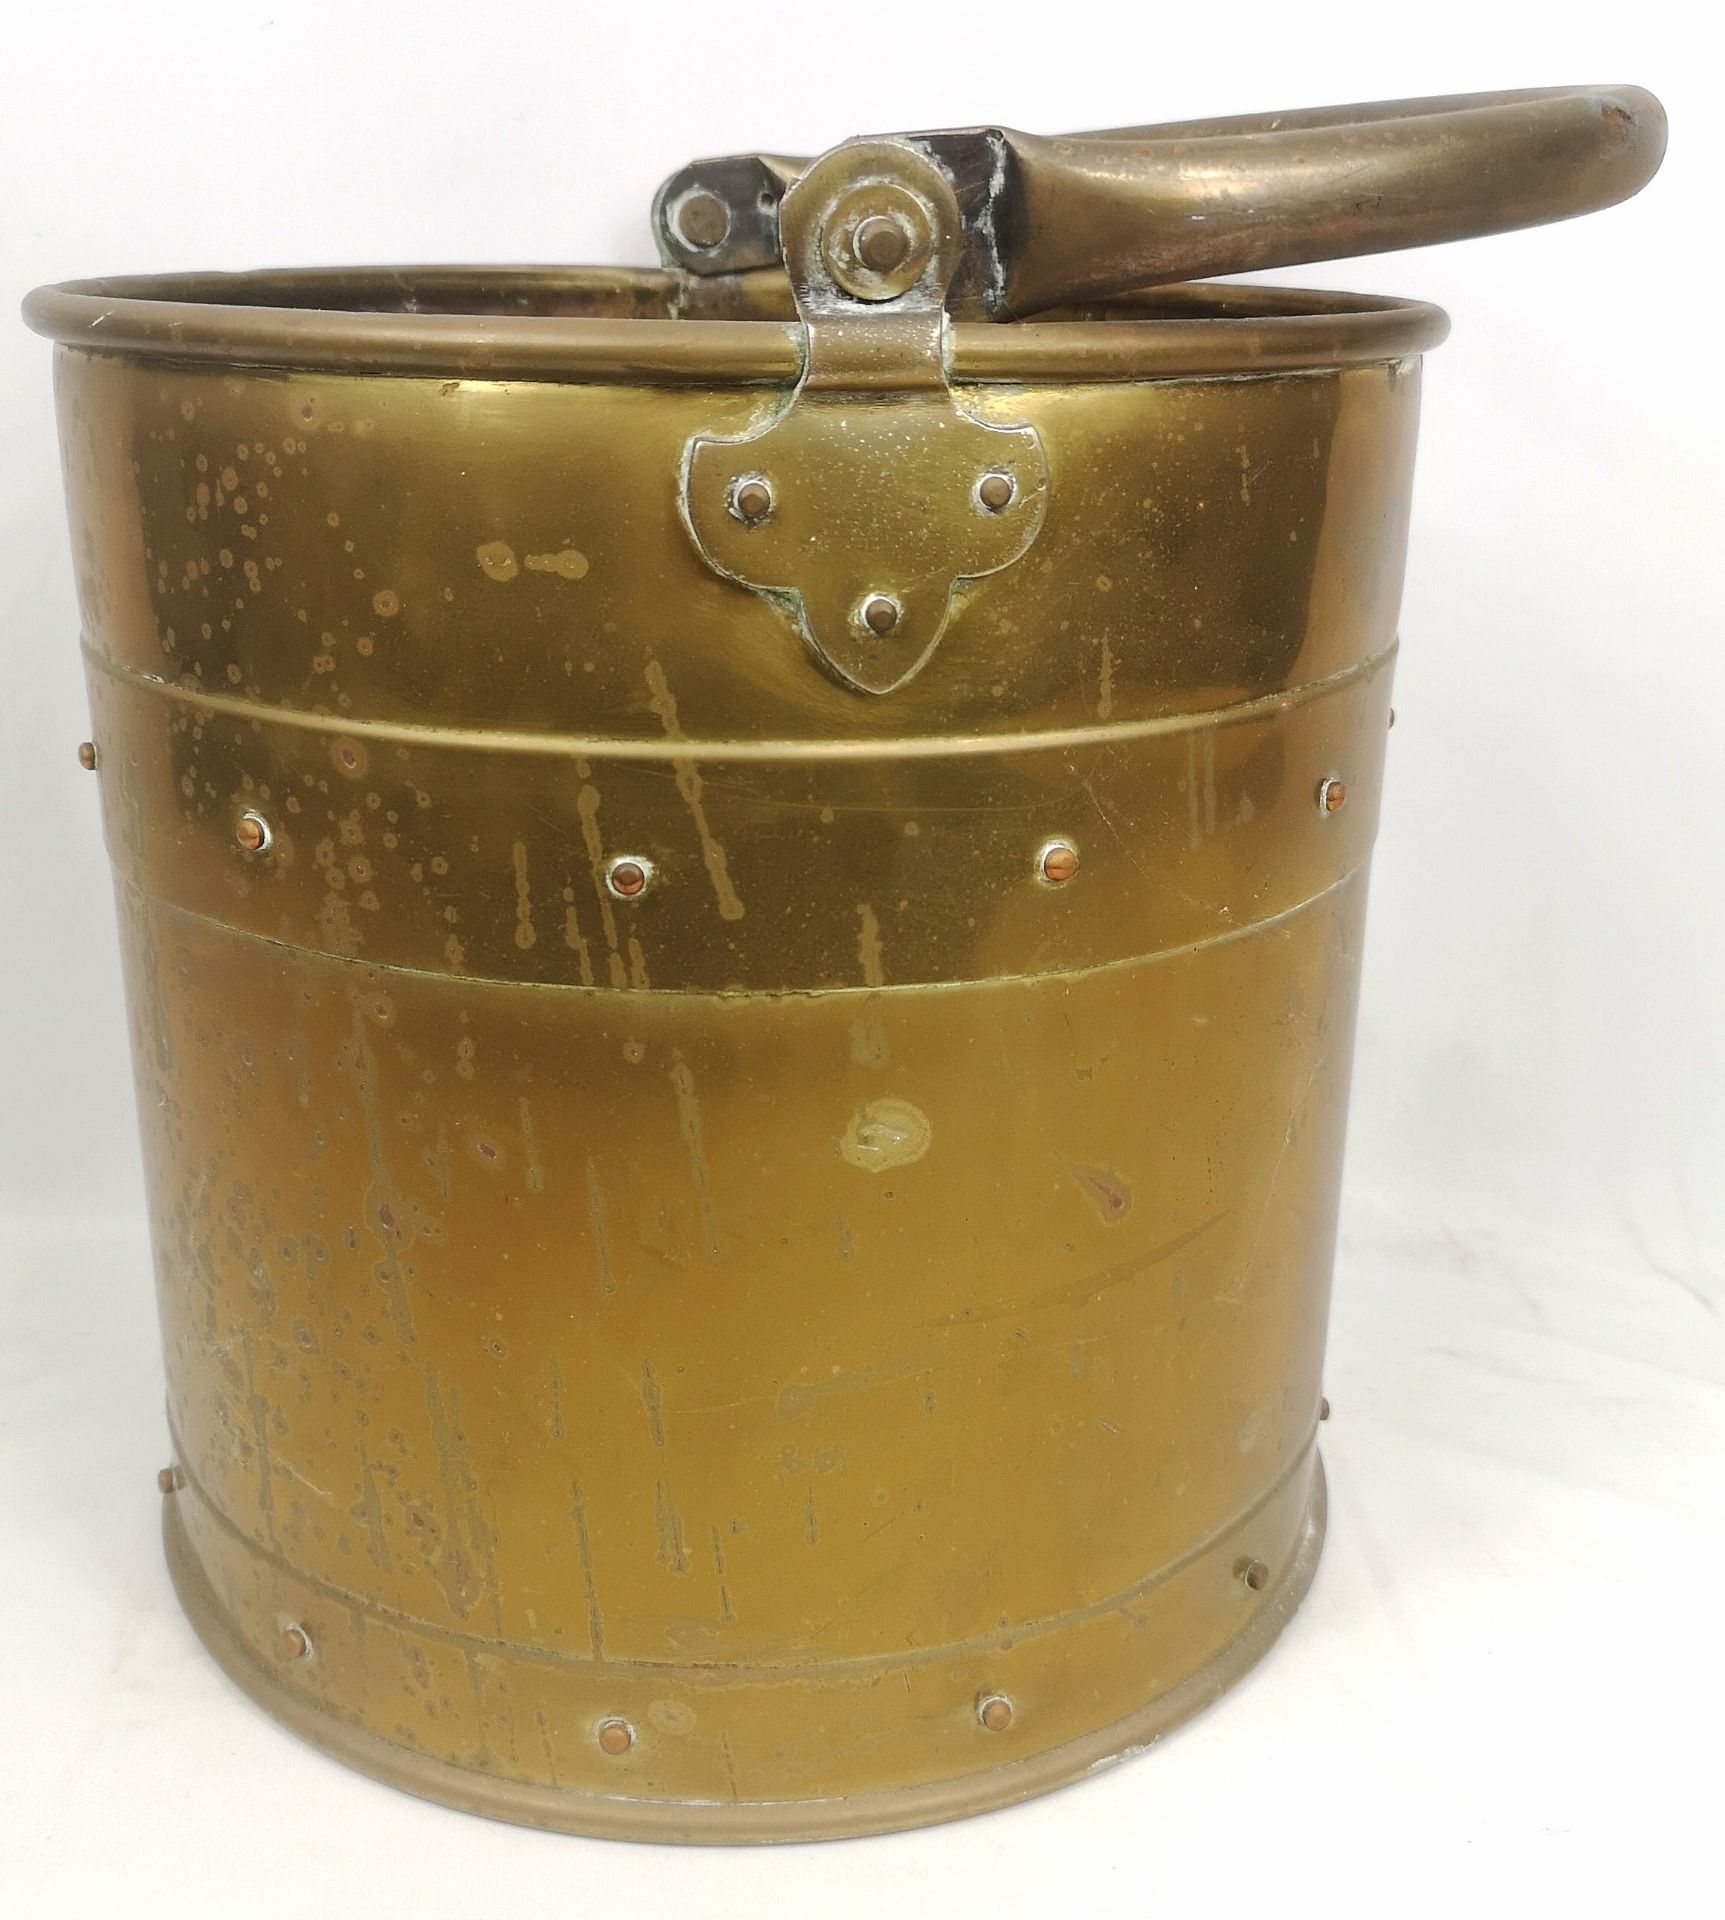 Brass pail with copper rivets